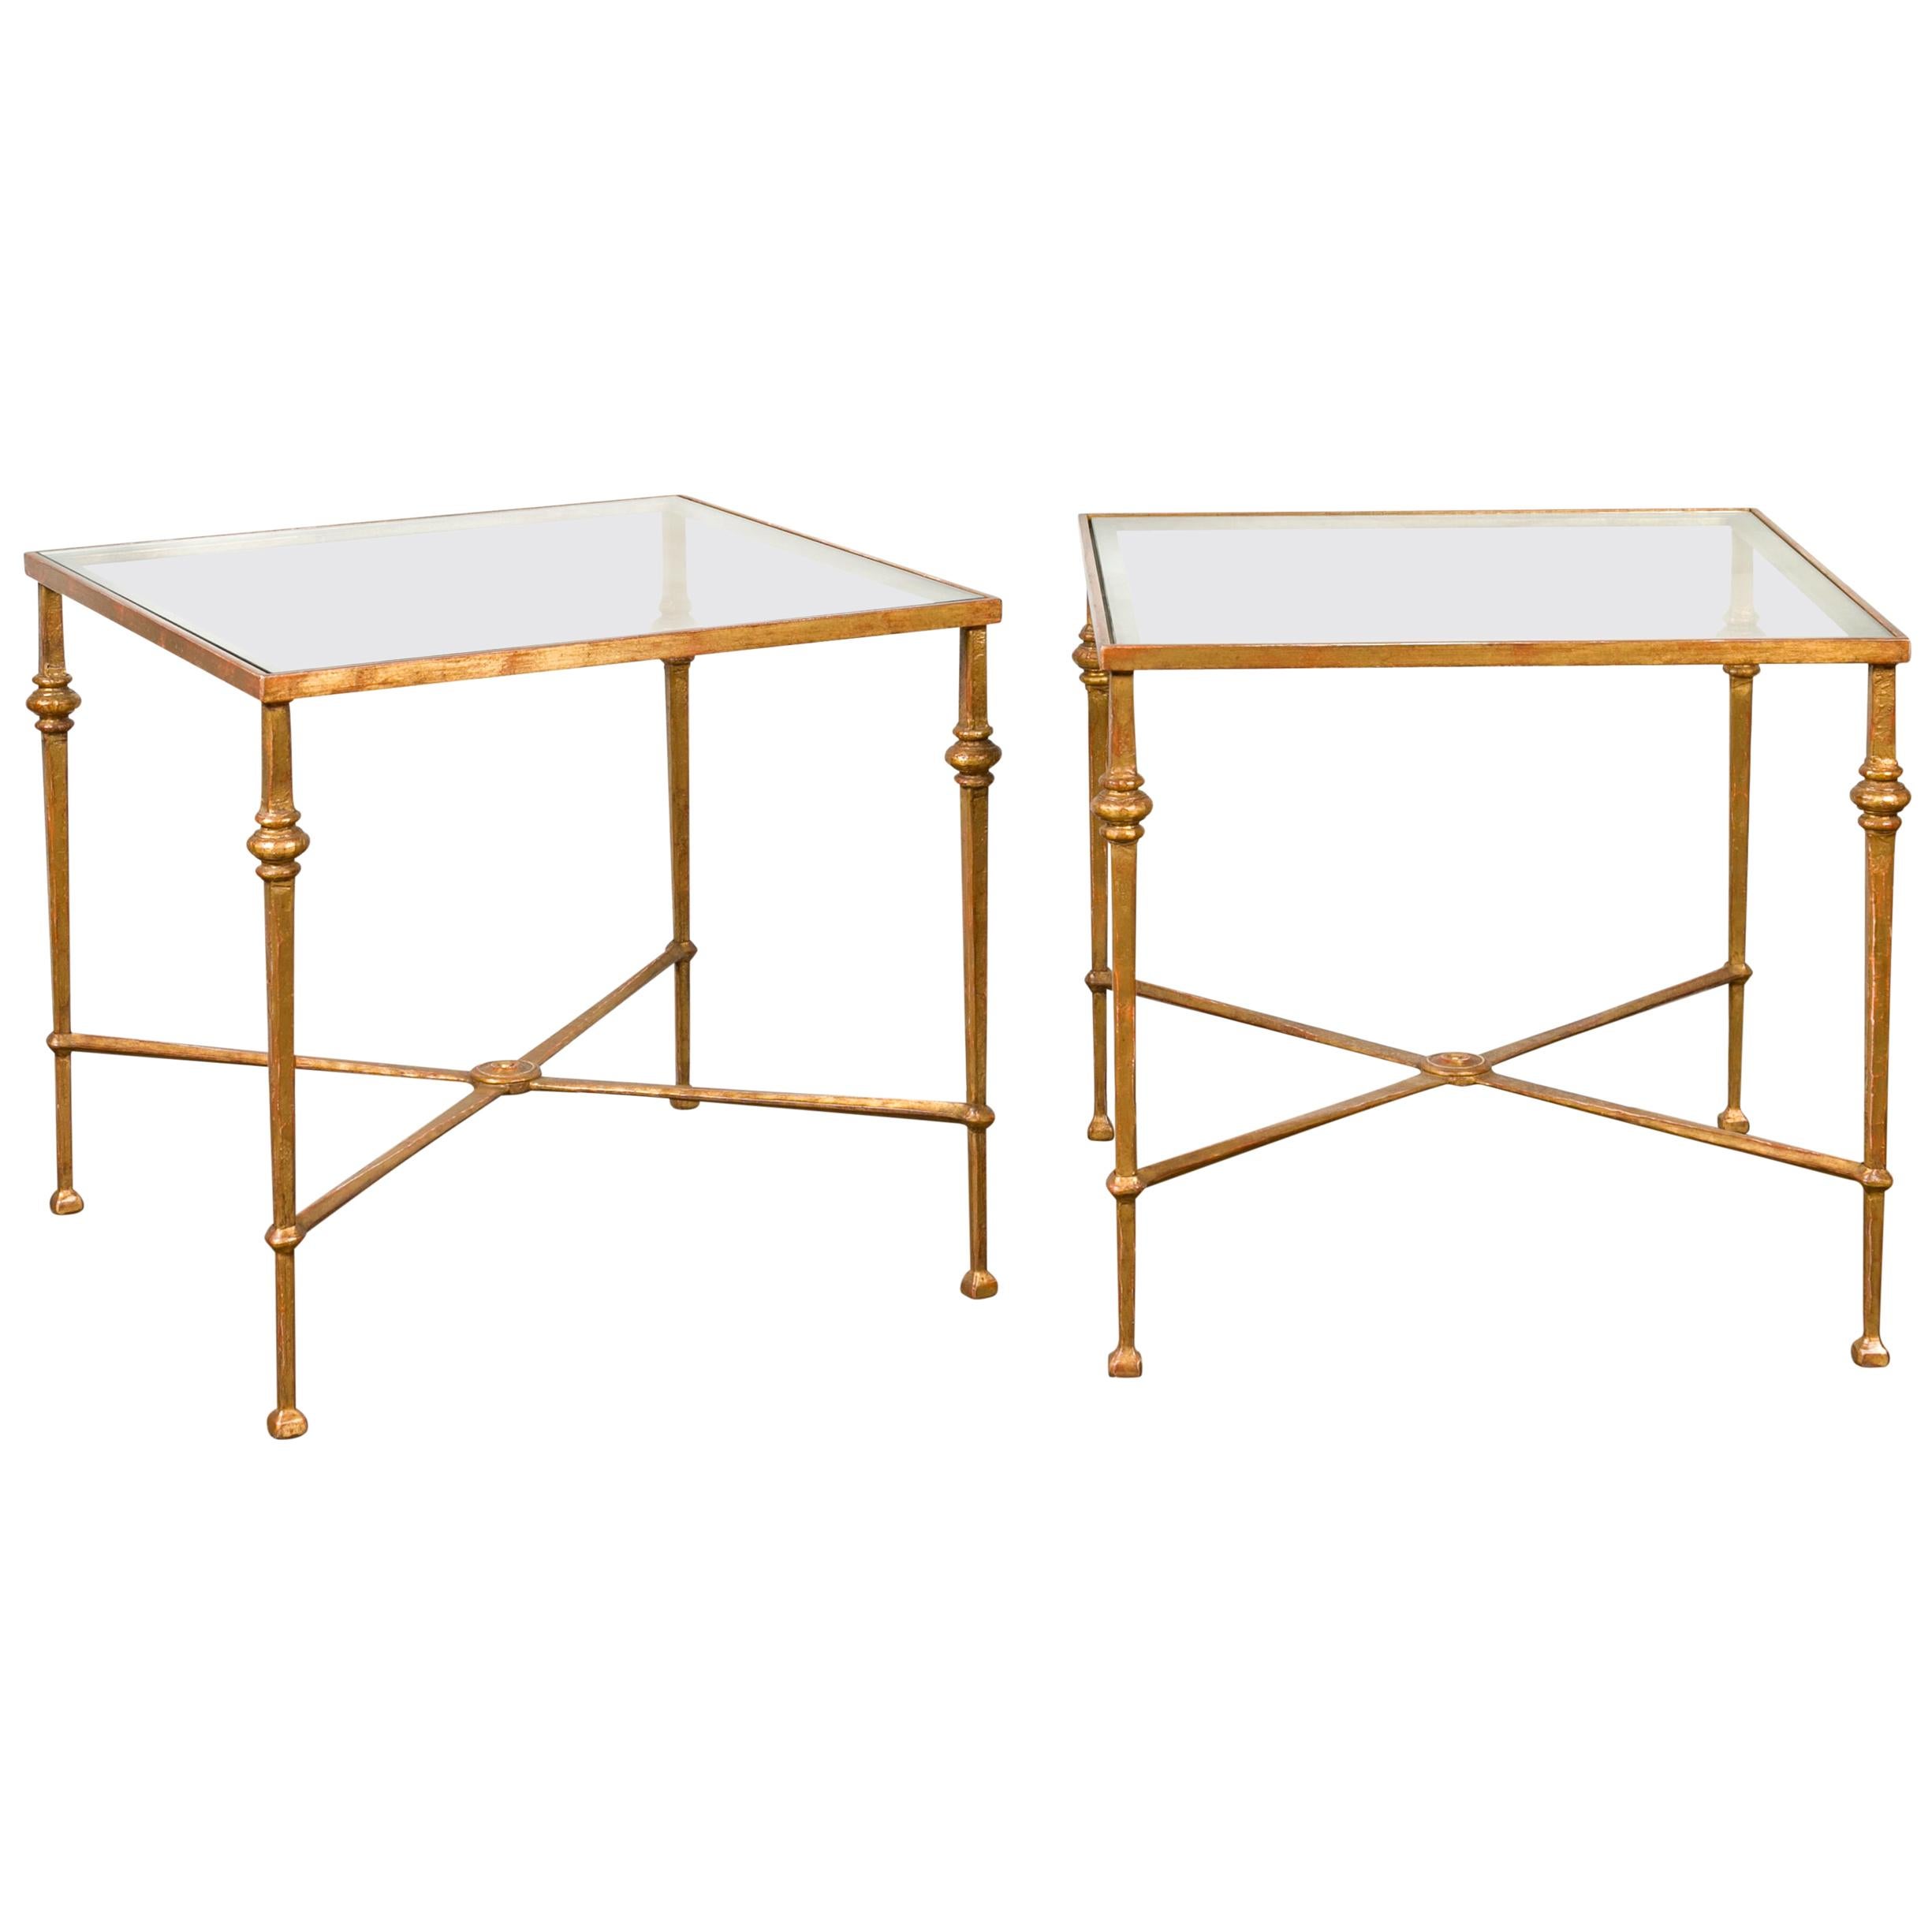 Pair of Midcentury Gilt Iron Side Tables with Glass Tops and Cross Stretchers